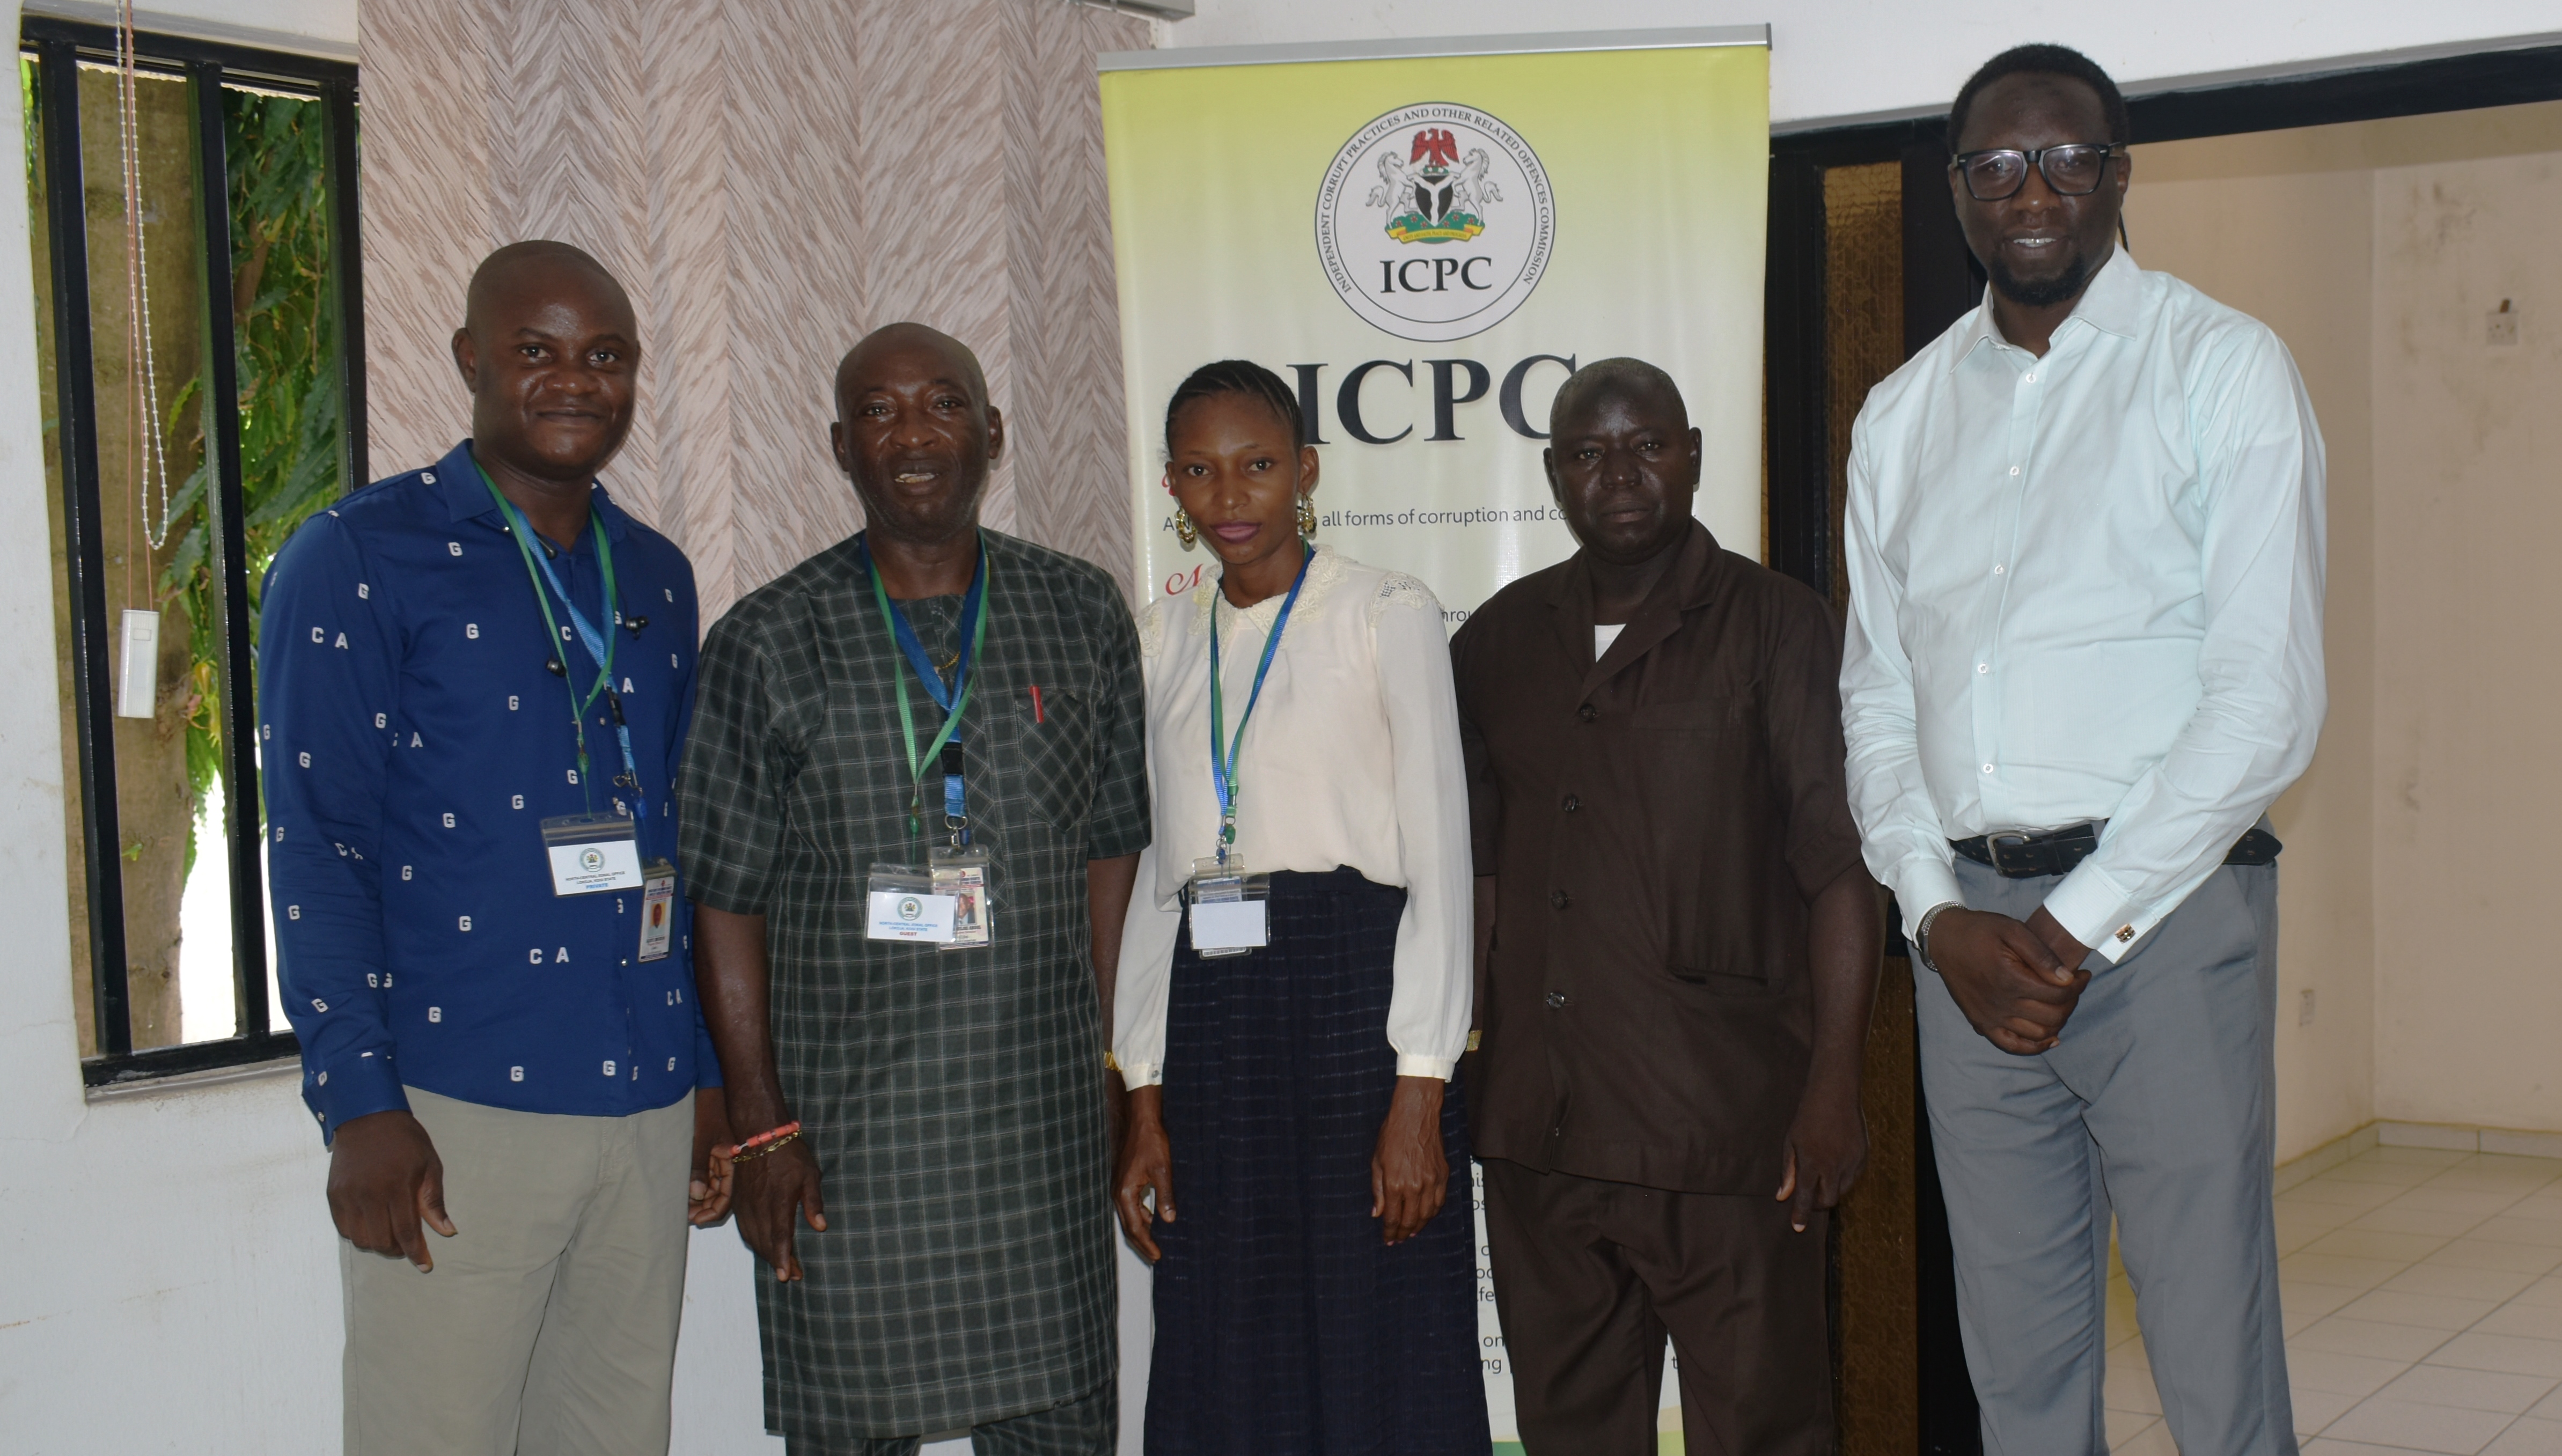 Conscience for Human Rights and Conflict Resolution (CHRCR) Advocacy Visit to Independent Corrupt Practices and Other Related Offences Commission (ICPC).